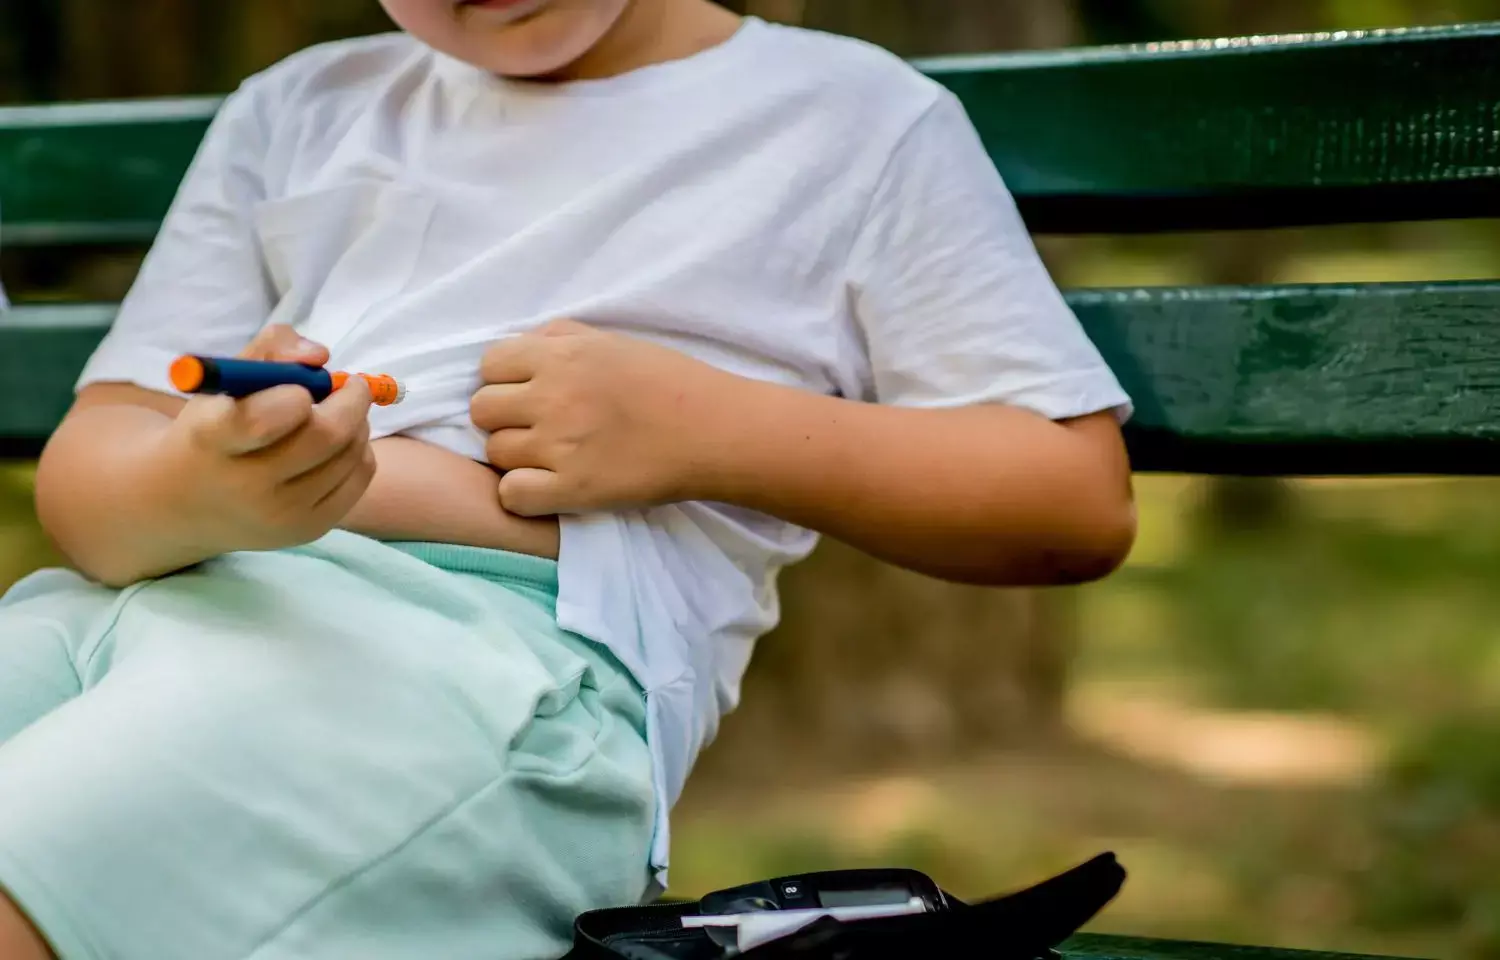 Tubeless automated insulin delivery system safe for use in young children with type 1 diabetes: Study